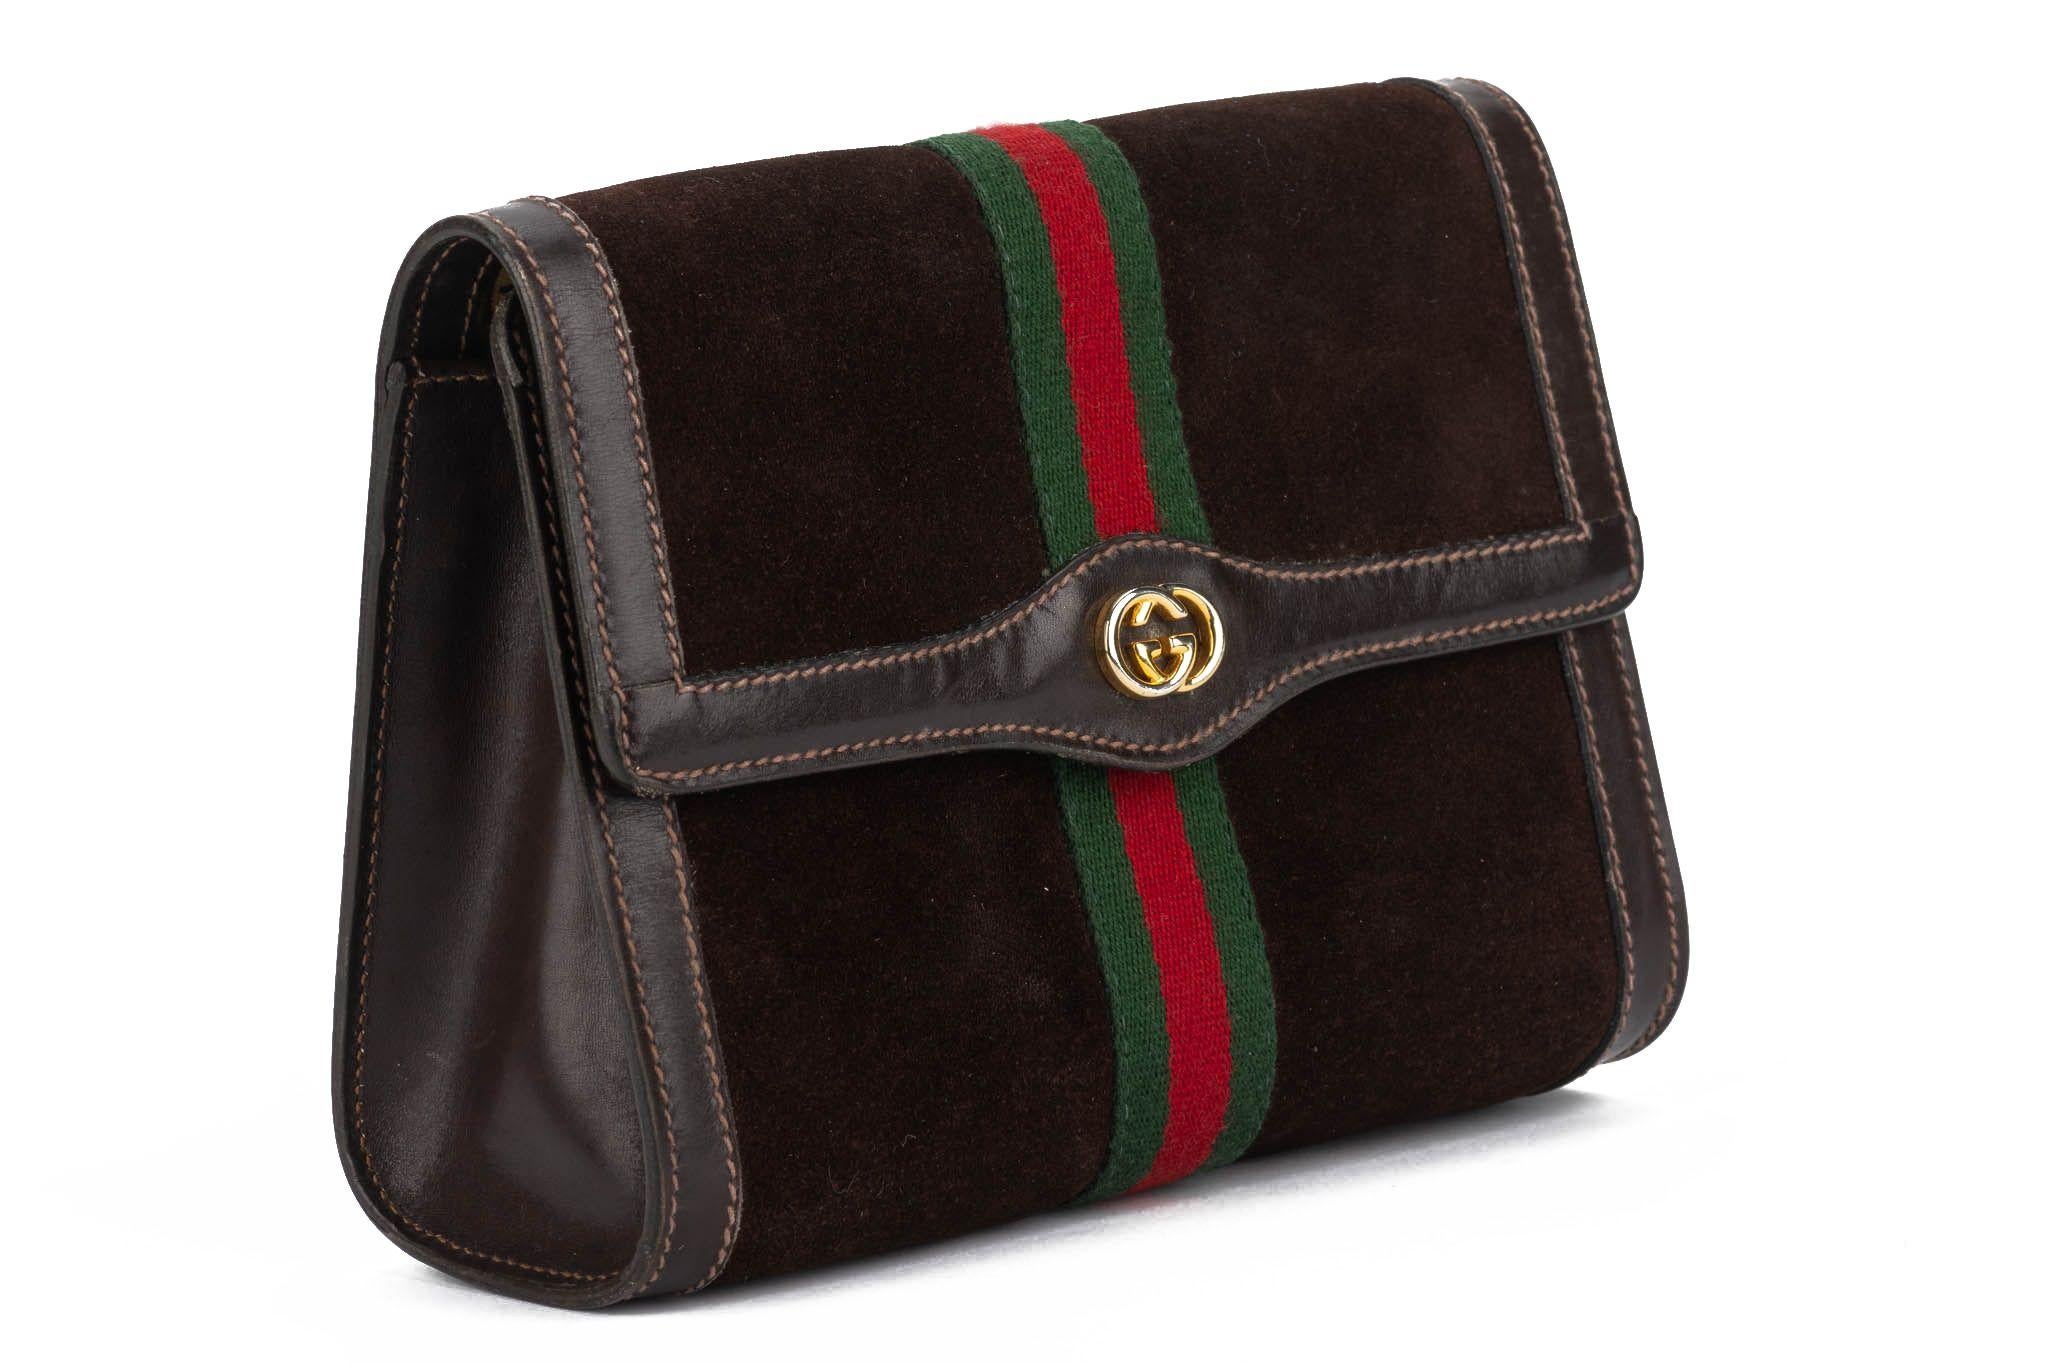 Gucci excellent condition vintage brown suede clutch with signature striped detail and gold logo. Lined in logo plastic.